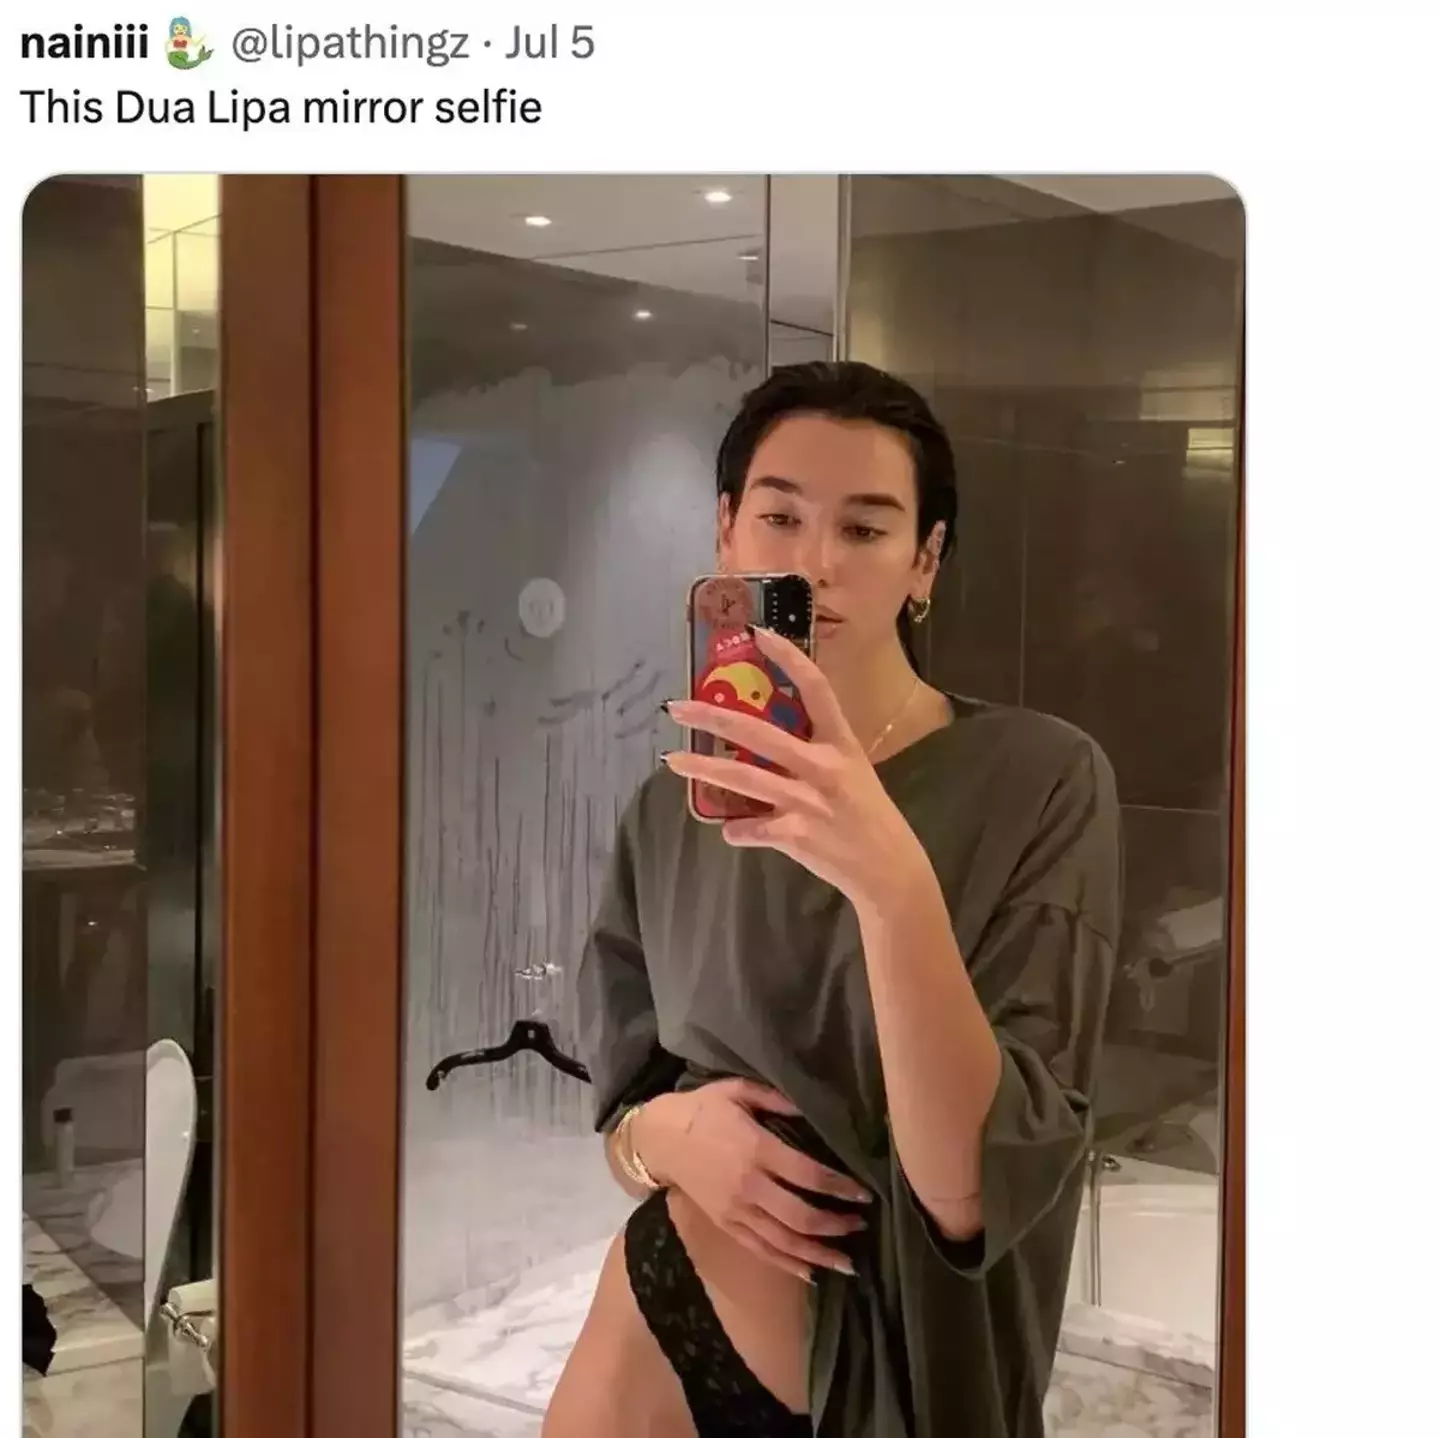 Fans couldn't stop commenting about the 'NSFW detail' in the star's selfie. (dualipa/Instagram/lipathingz/X)